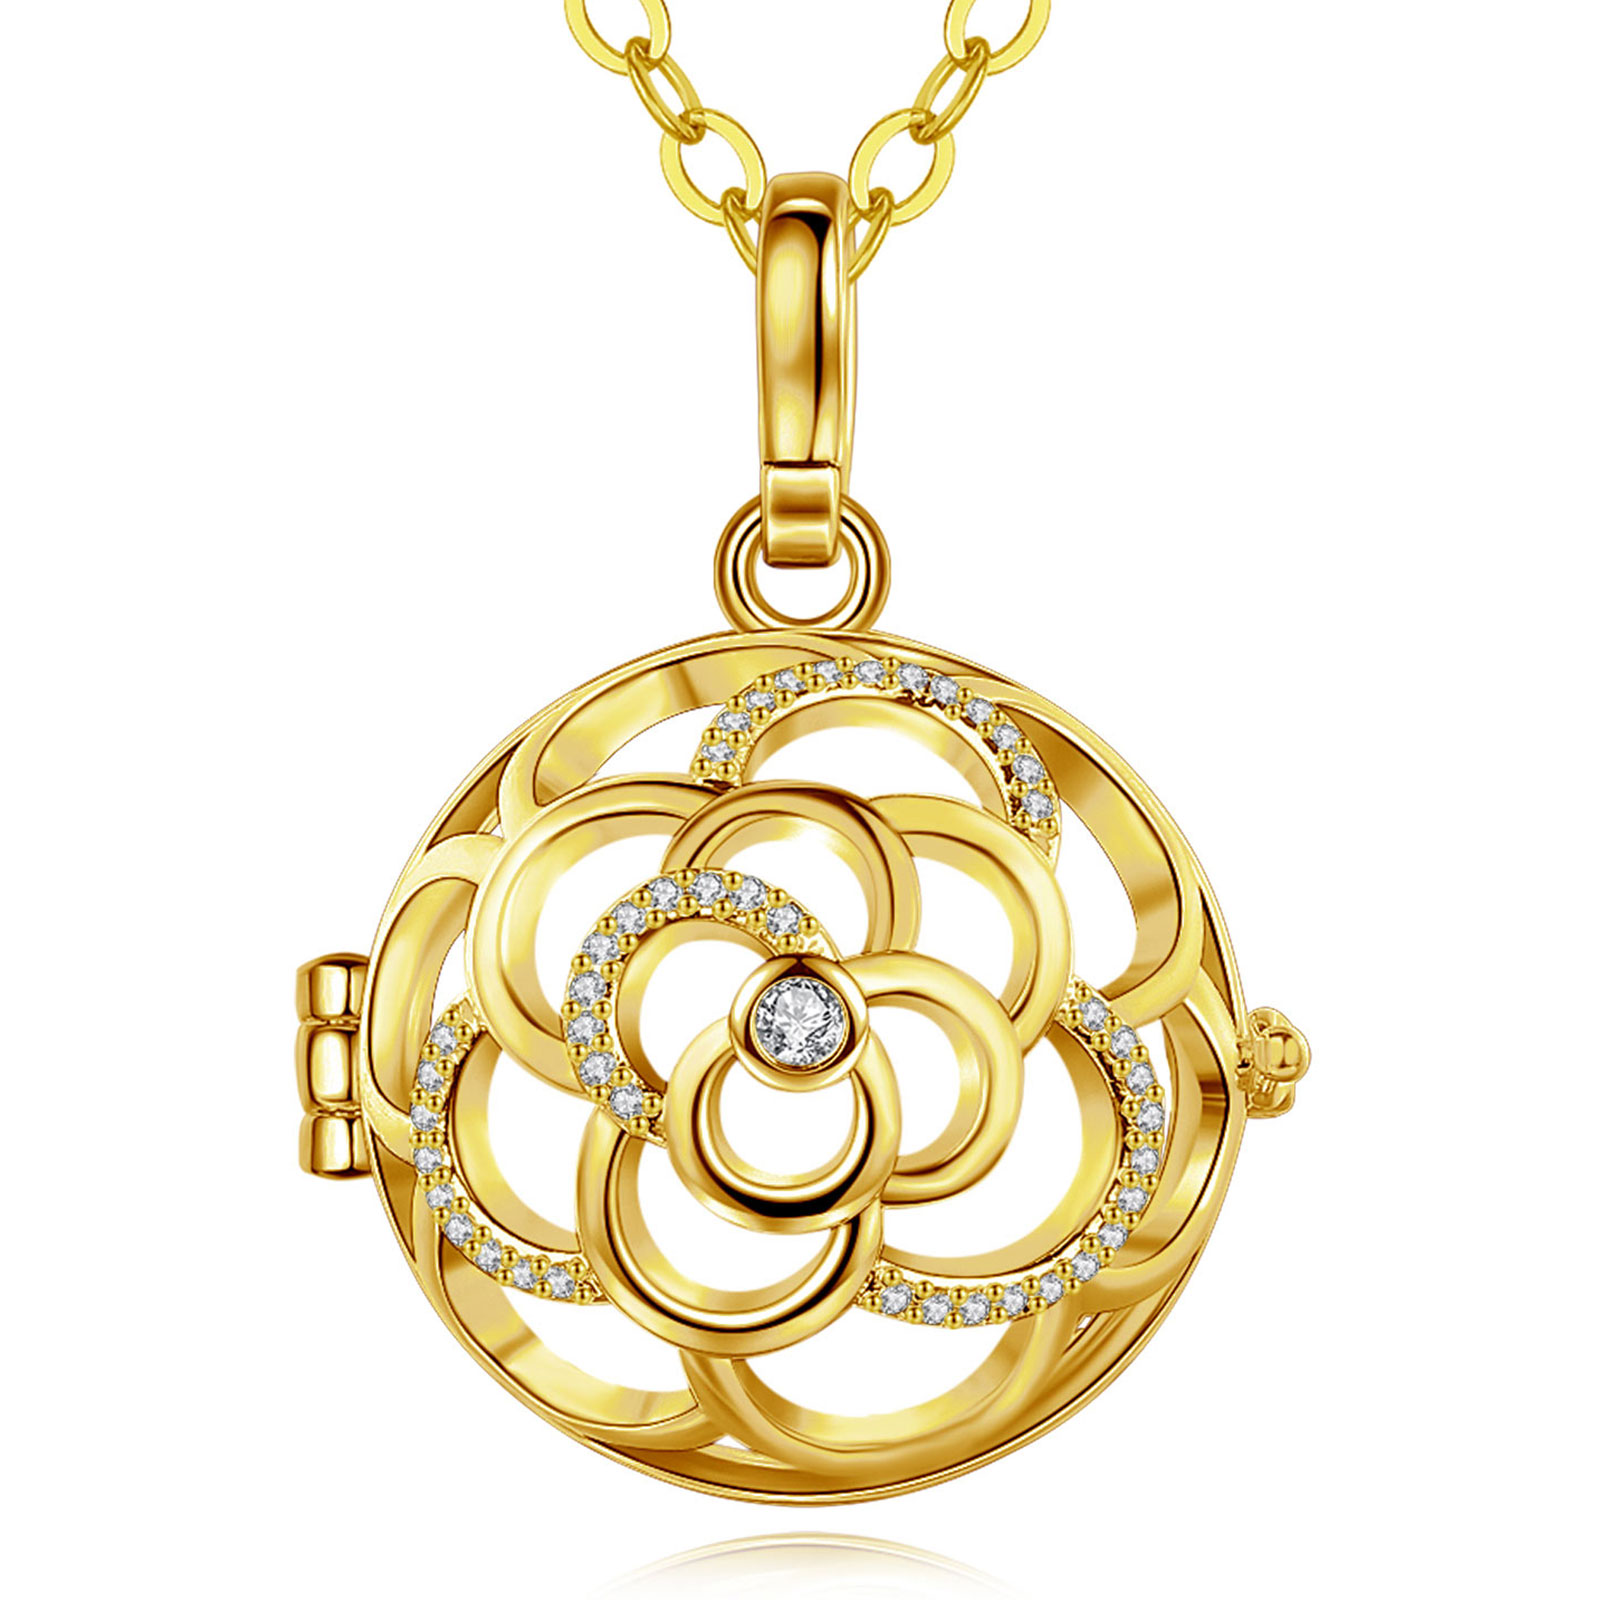 Merryshine Jewelry Golden rose hollowed-out cage S925 Sterling Silver Harmony Chime Ball Necklace